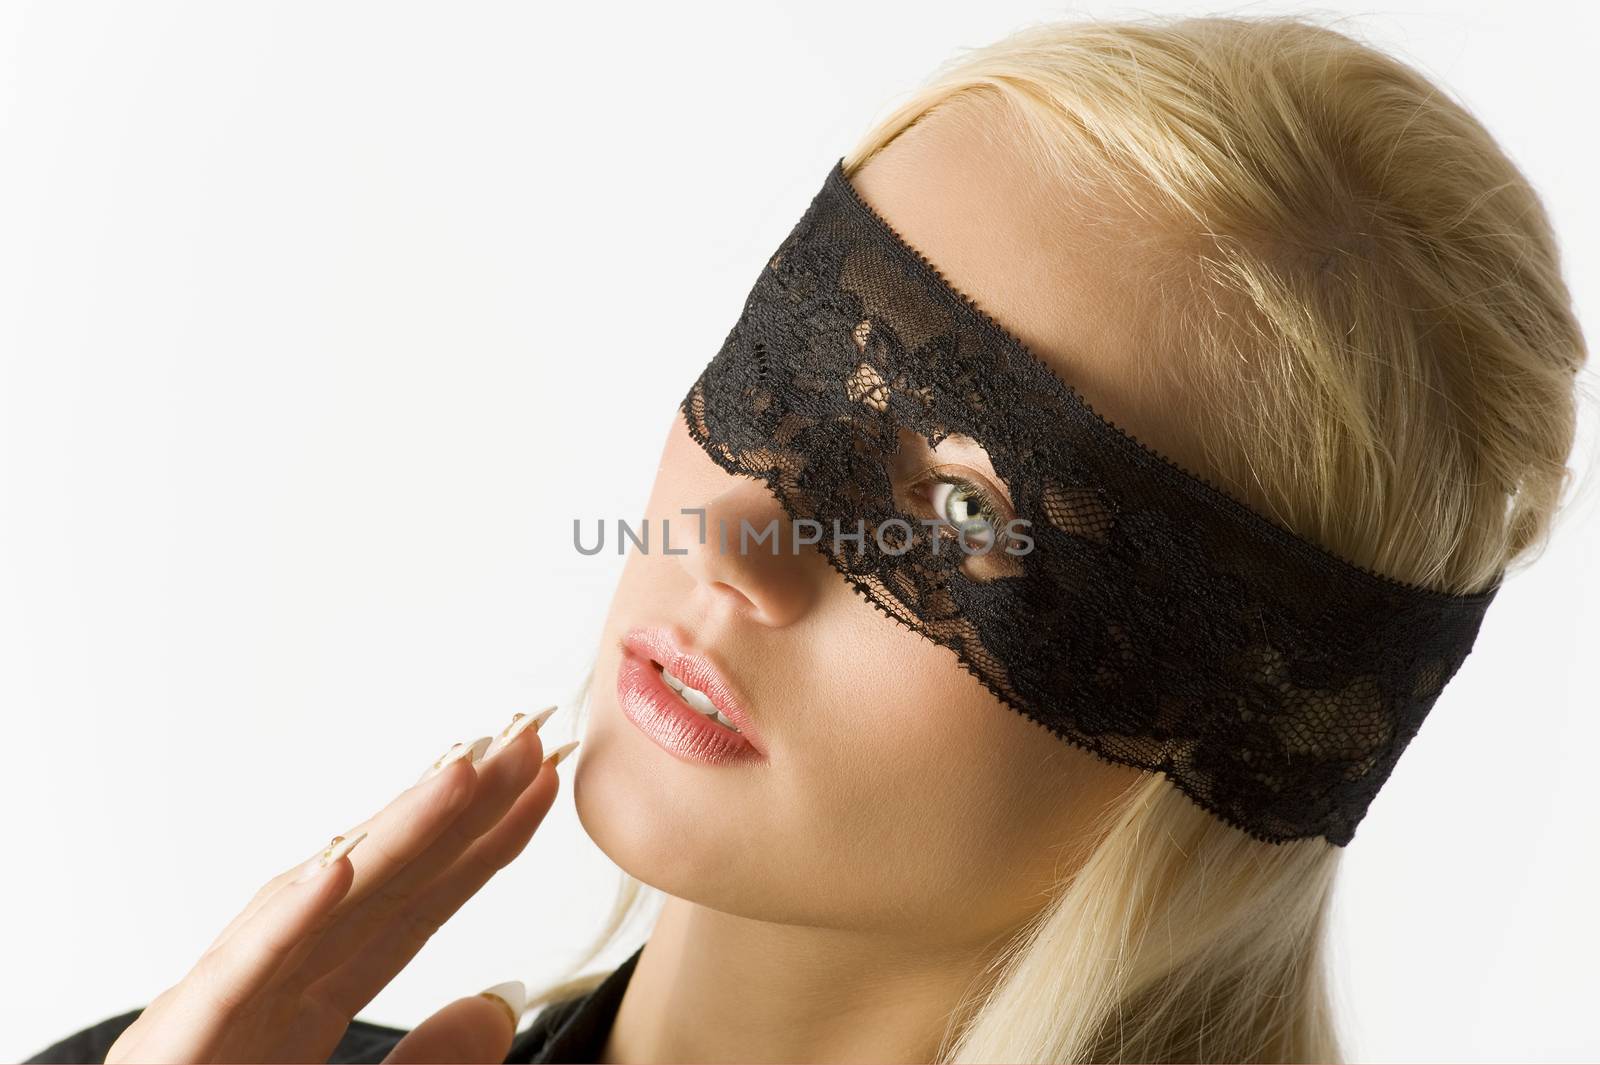 nice portrait of beautiful blond young girl with a black lace mask